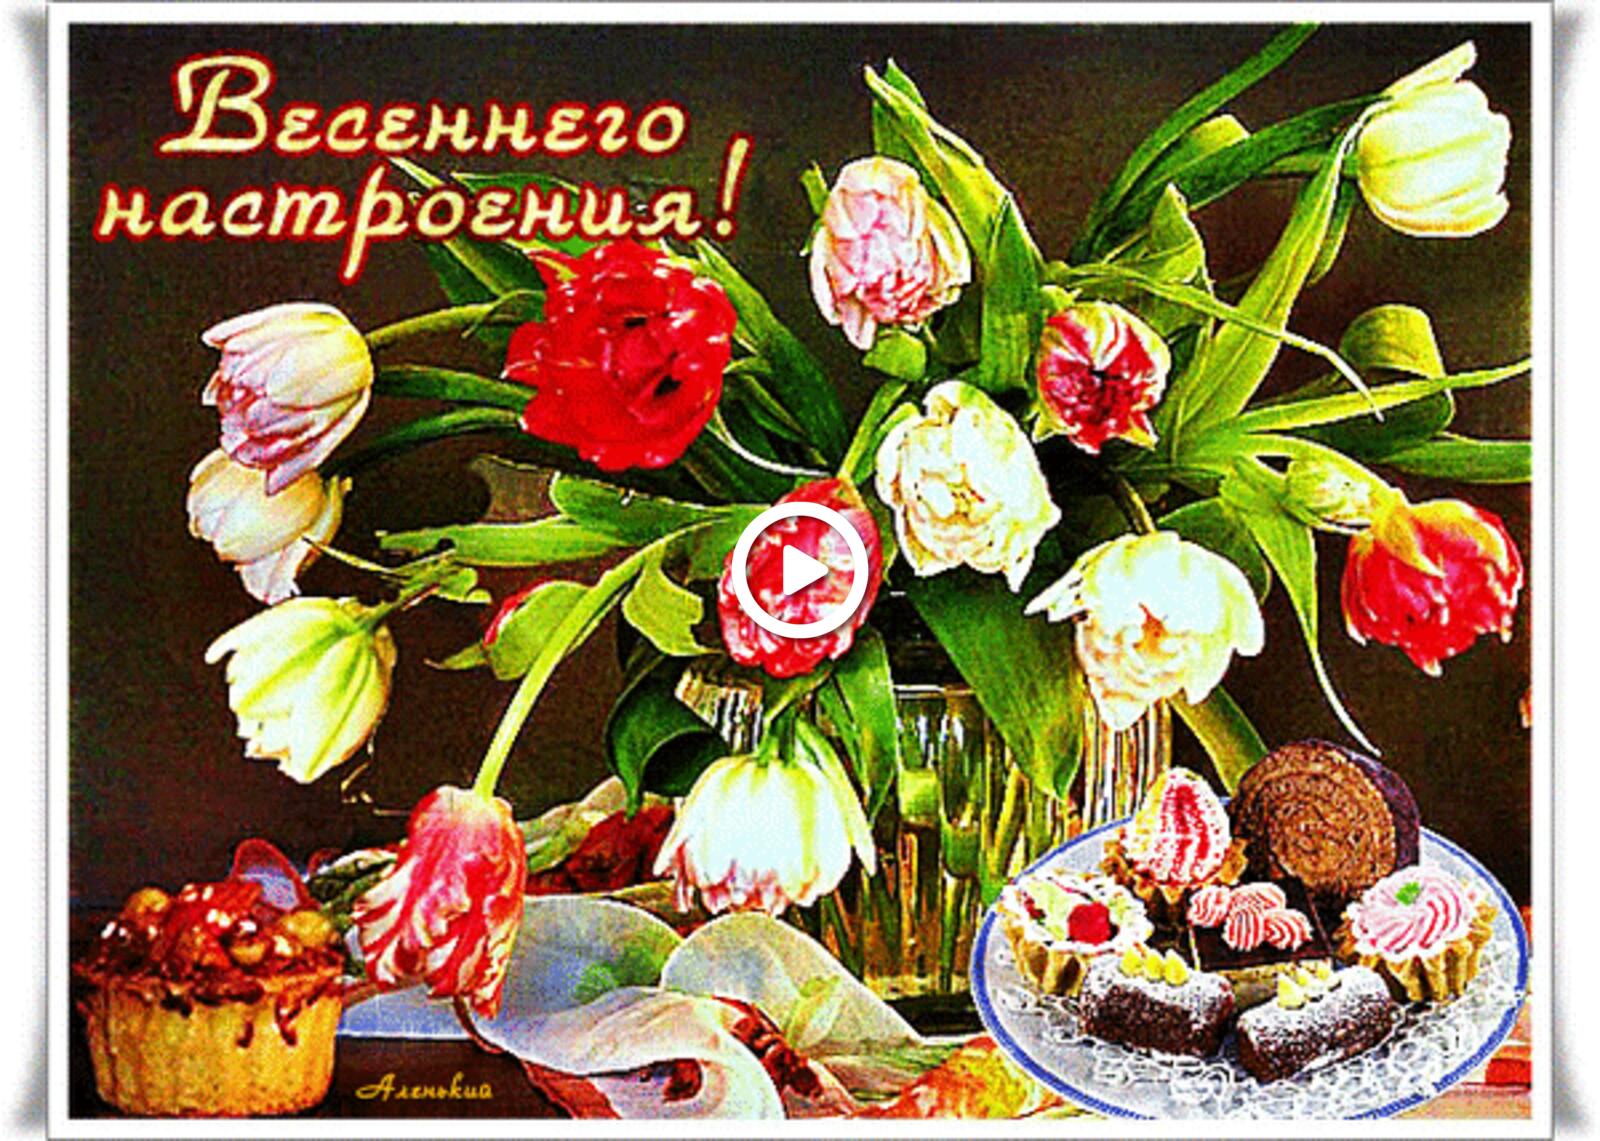 A postcard on the subject of bouquet mood flowers for free